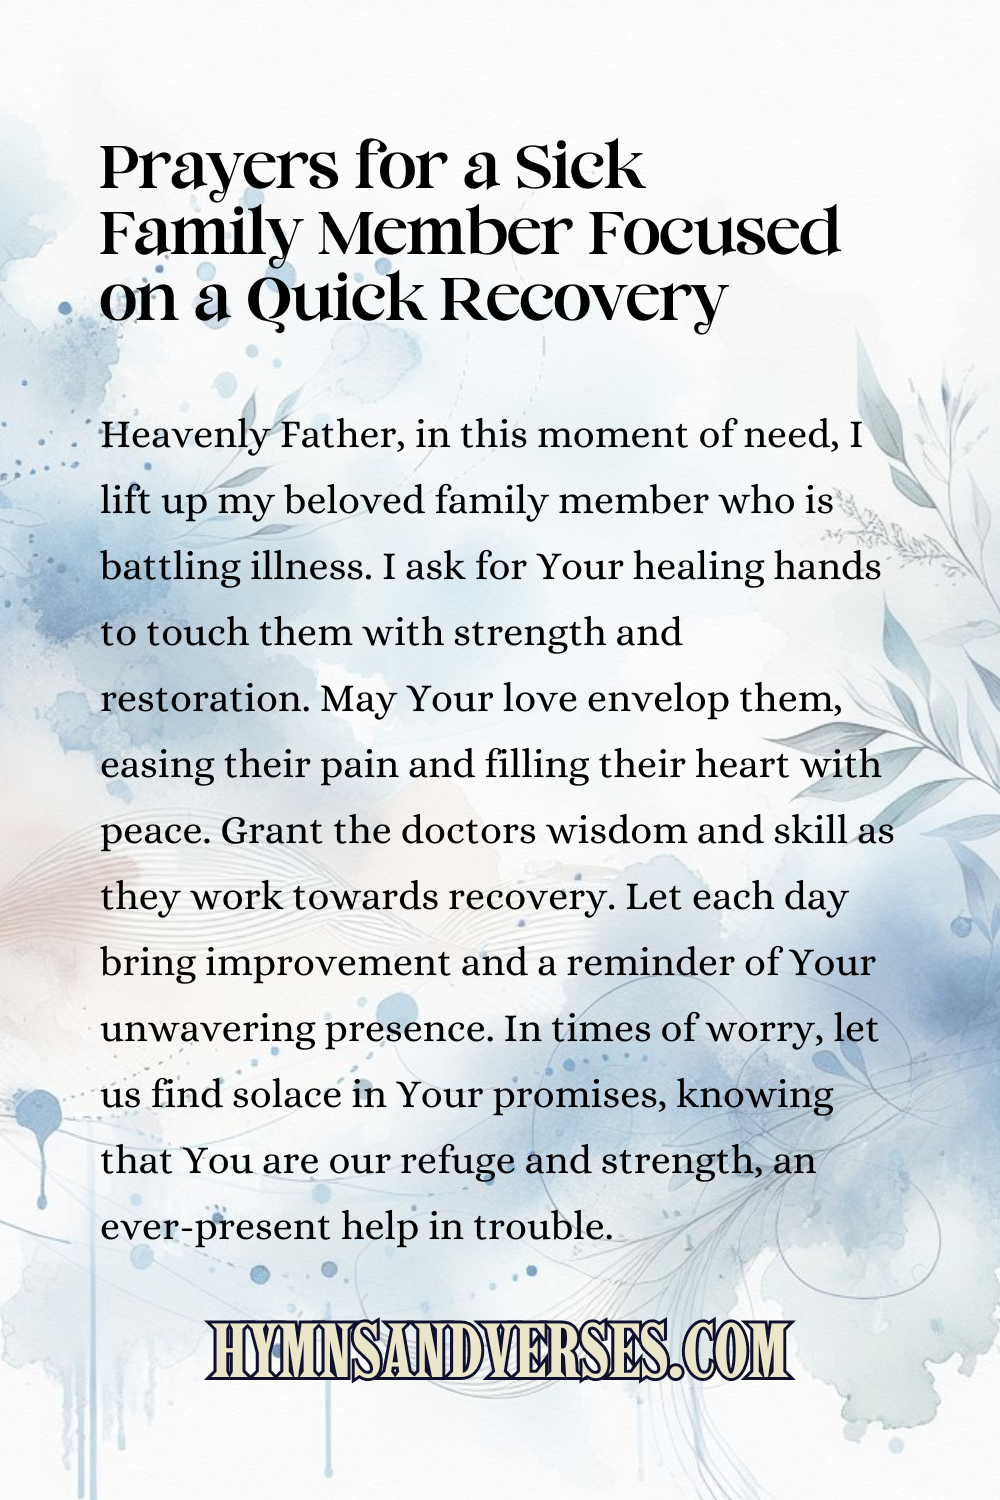 Pin sized image for prayers for a sick family member focused on a quick recovery, reads: Heavenly Father, in this moment of need, I lift up my beloved family member who is battling illness. I ask for Your healing hands to touch them with strength and restoration. May Your love envelop them, easing their pain and filling their heart with peace. Grant the doctors wisdom and skill as they work towards recovery. Let each day bring improvement and a reminder of Your unwavering presence. In times of worry, let us find solace in Your promises, knowing that You are our refuge and strength, an ever-present help in trouble.